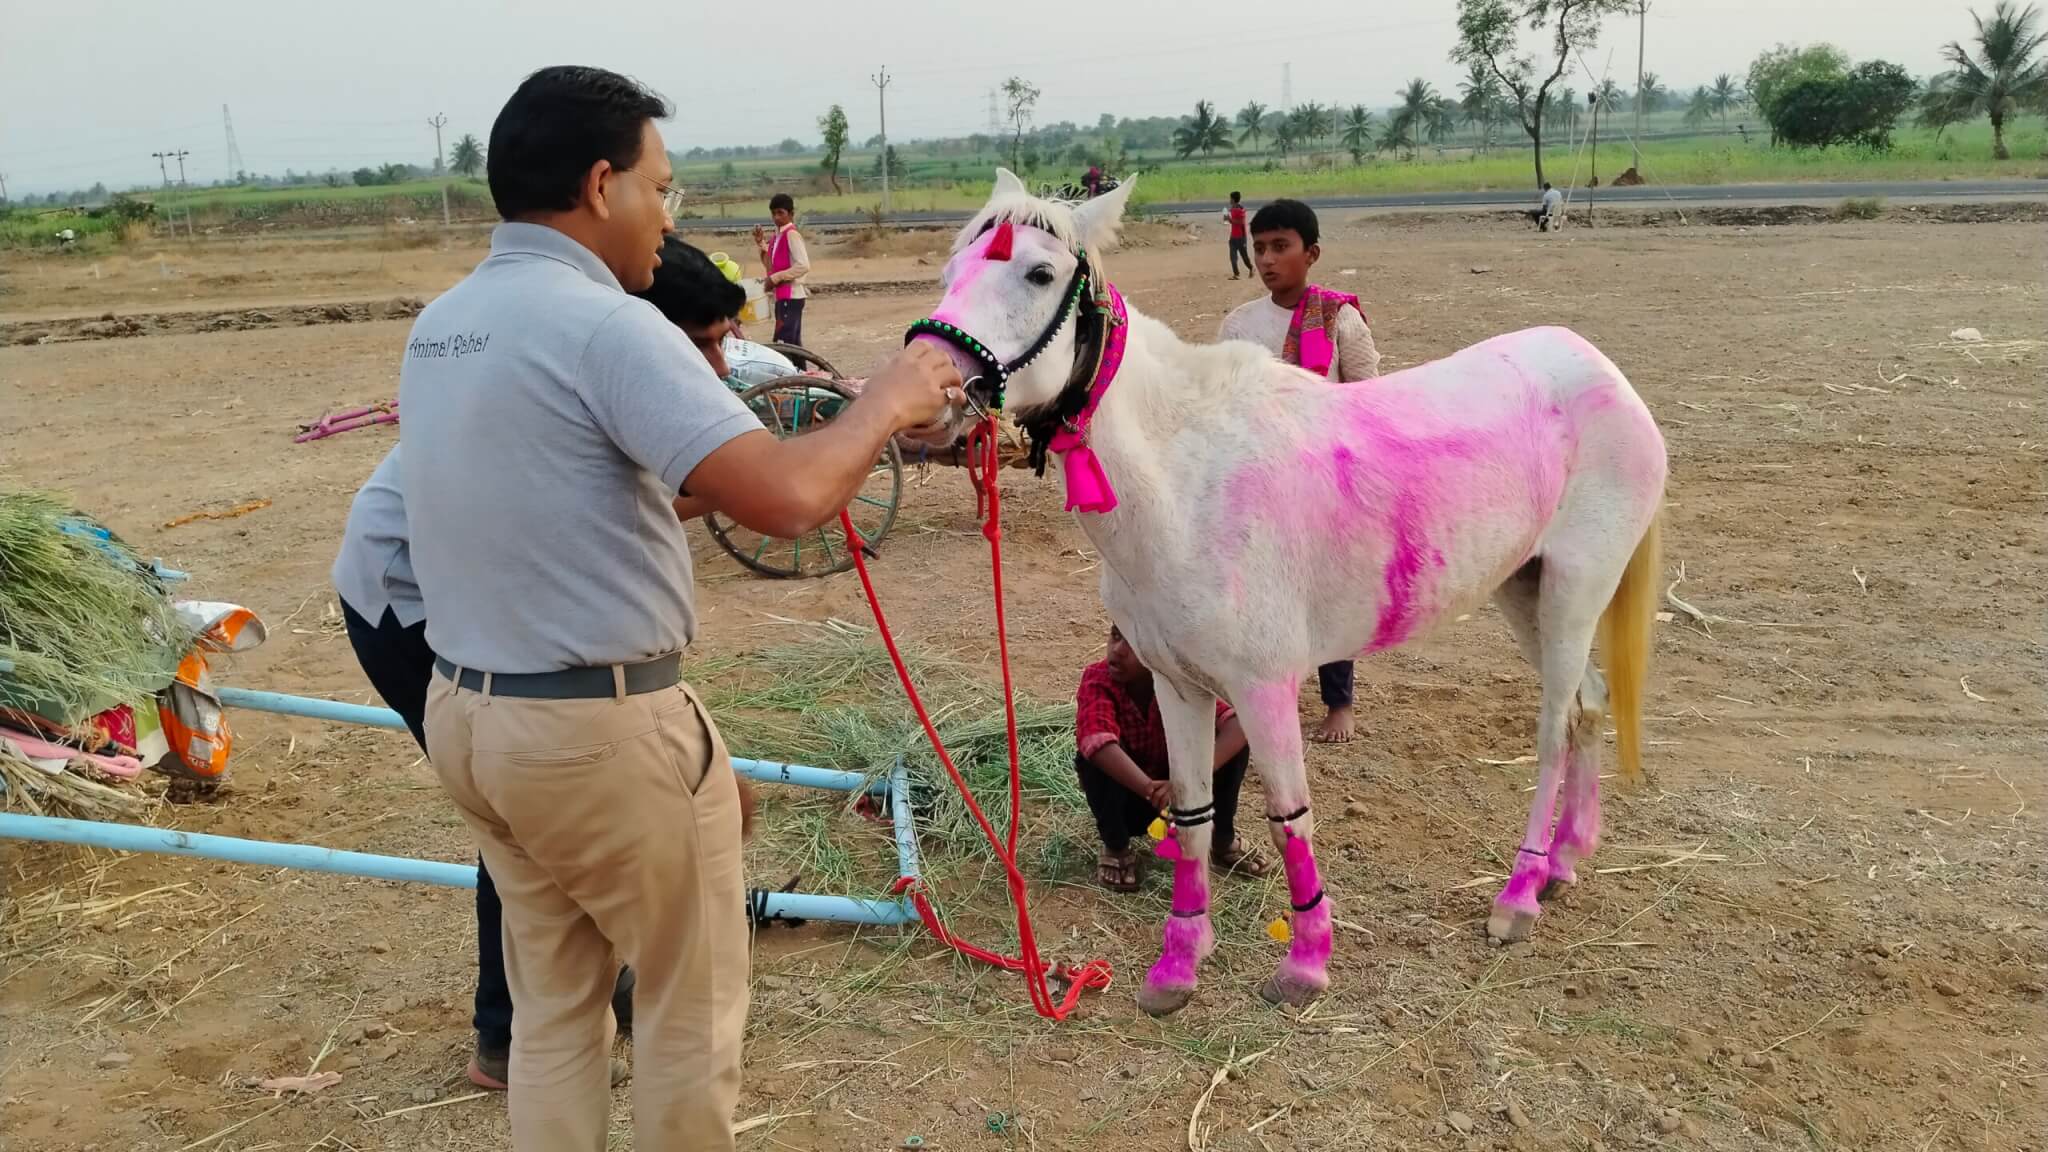 Staff at one of the Animal Rahat Chinchali rest camps remove an illegal sharp bit from a pony.